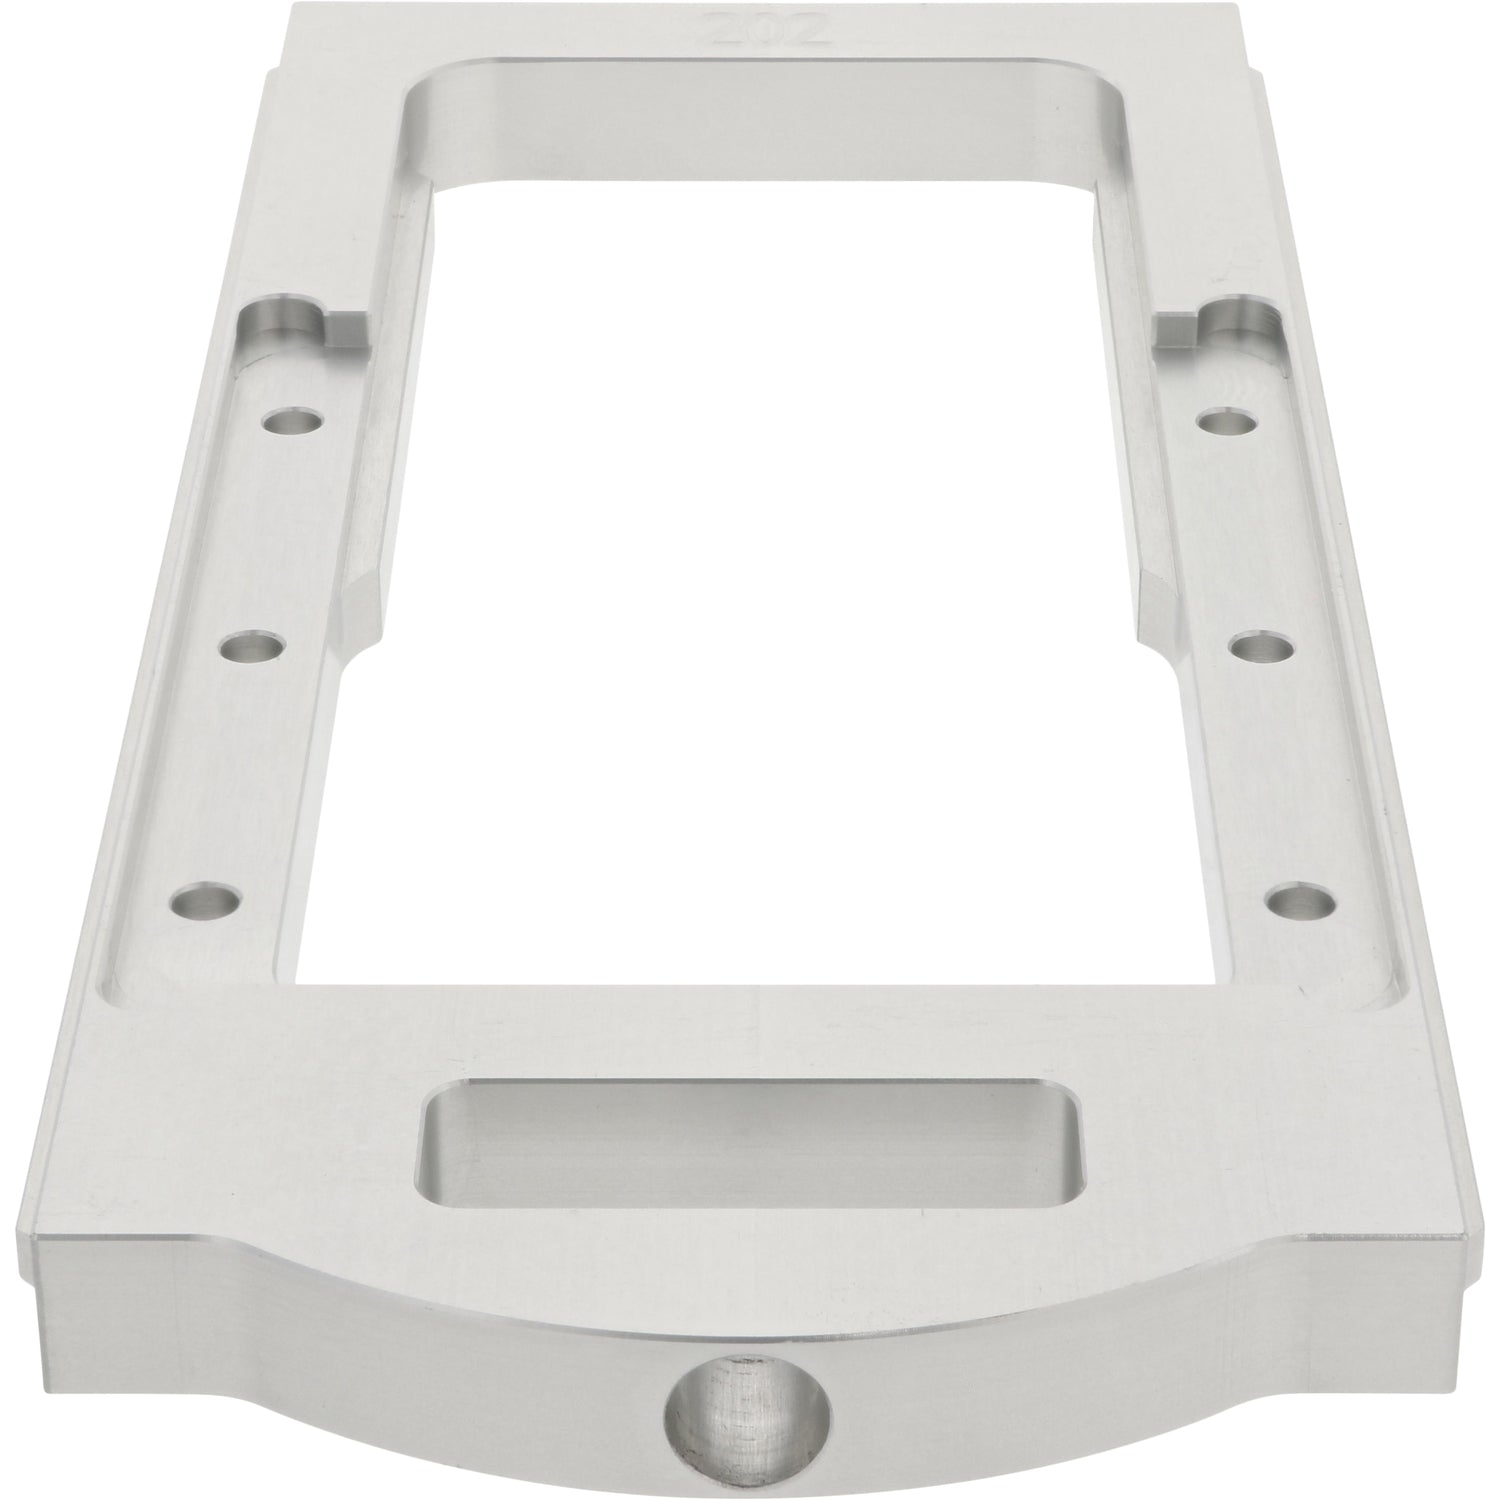 Gray aluminum rectangular part with center cut out and multiple through holes. on a white background. 